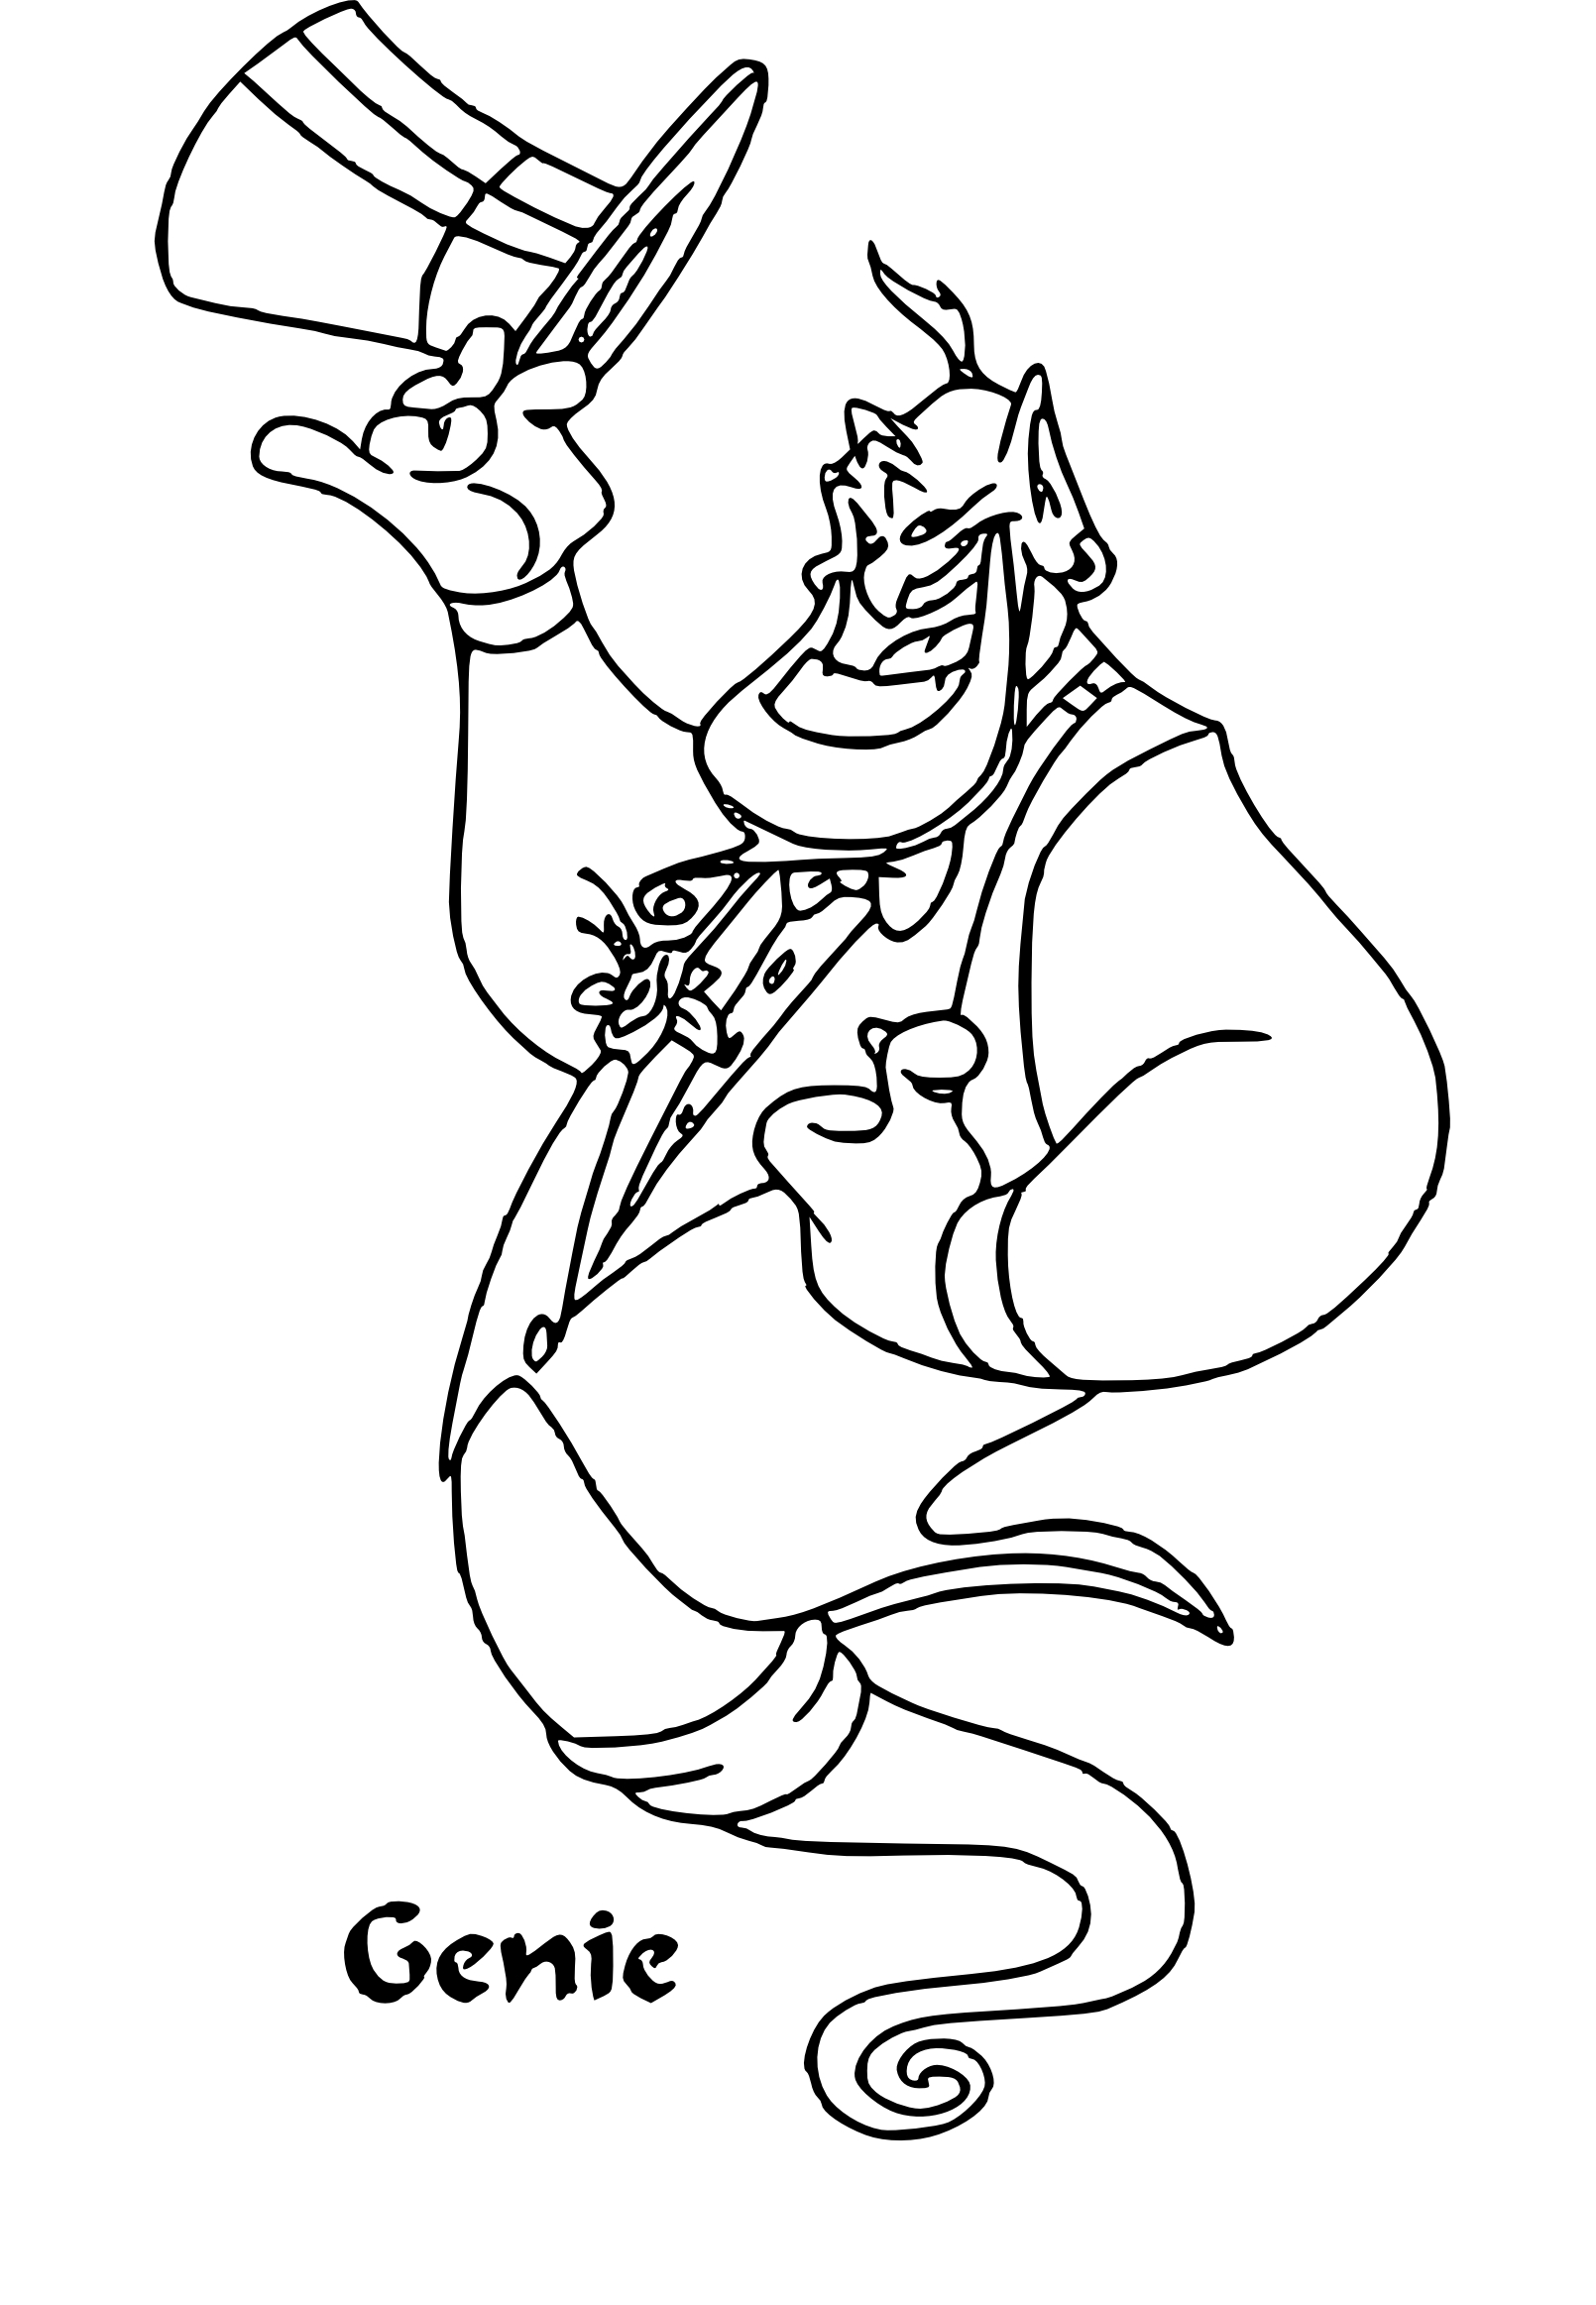 Genius Of The Lamp coloring page